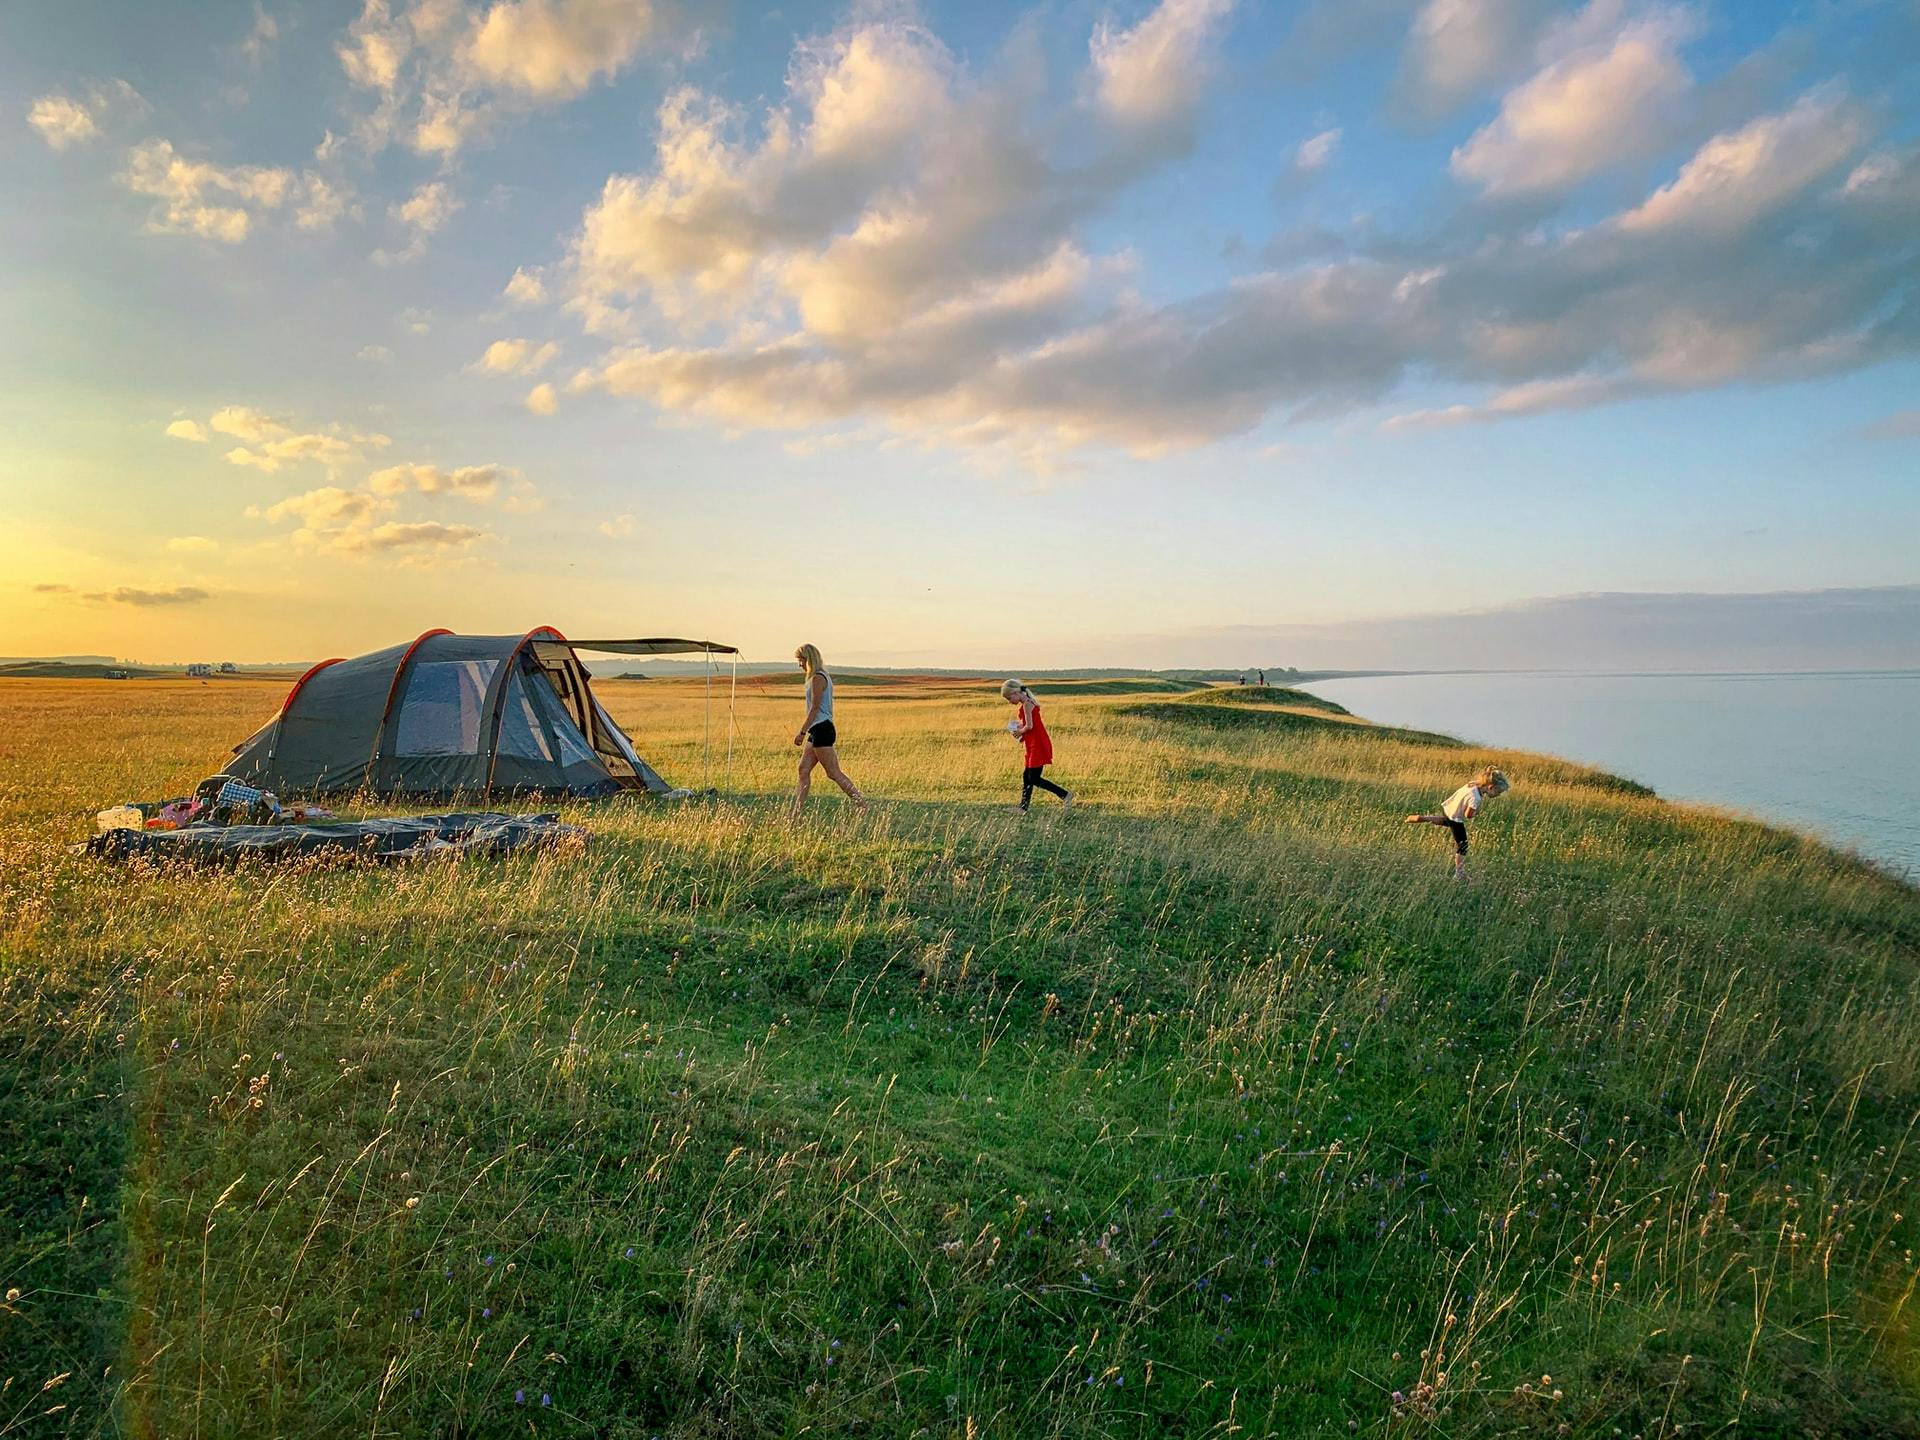 Three people running near a tent that is pitched in an open plain.